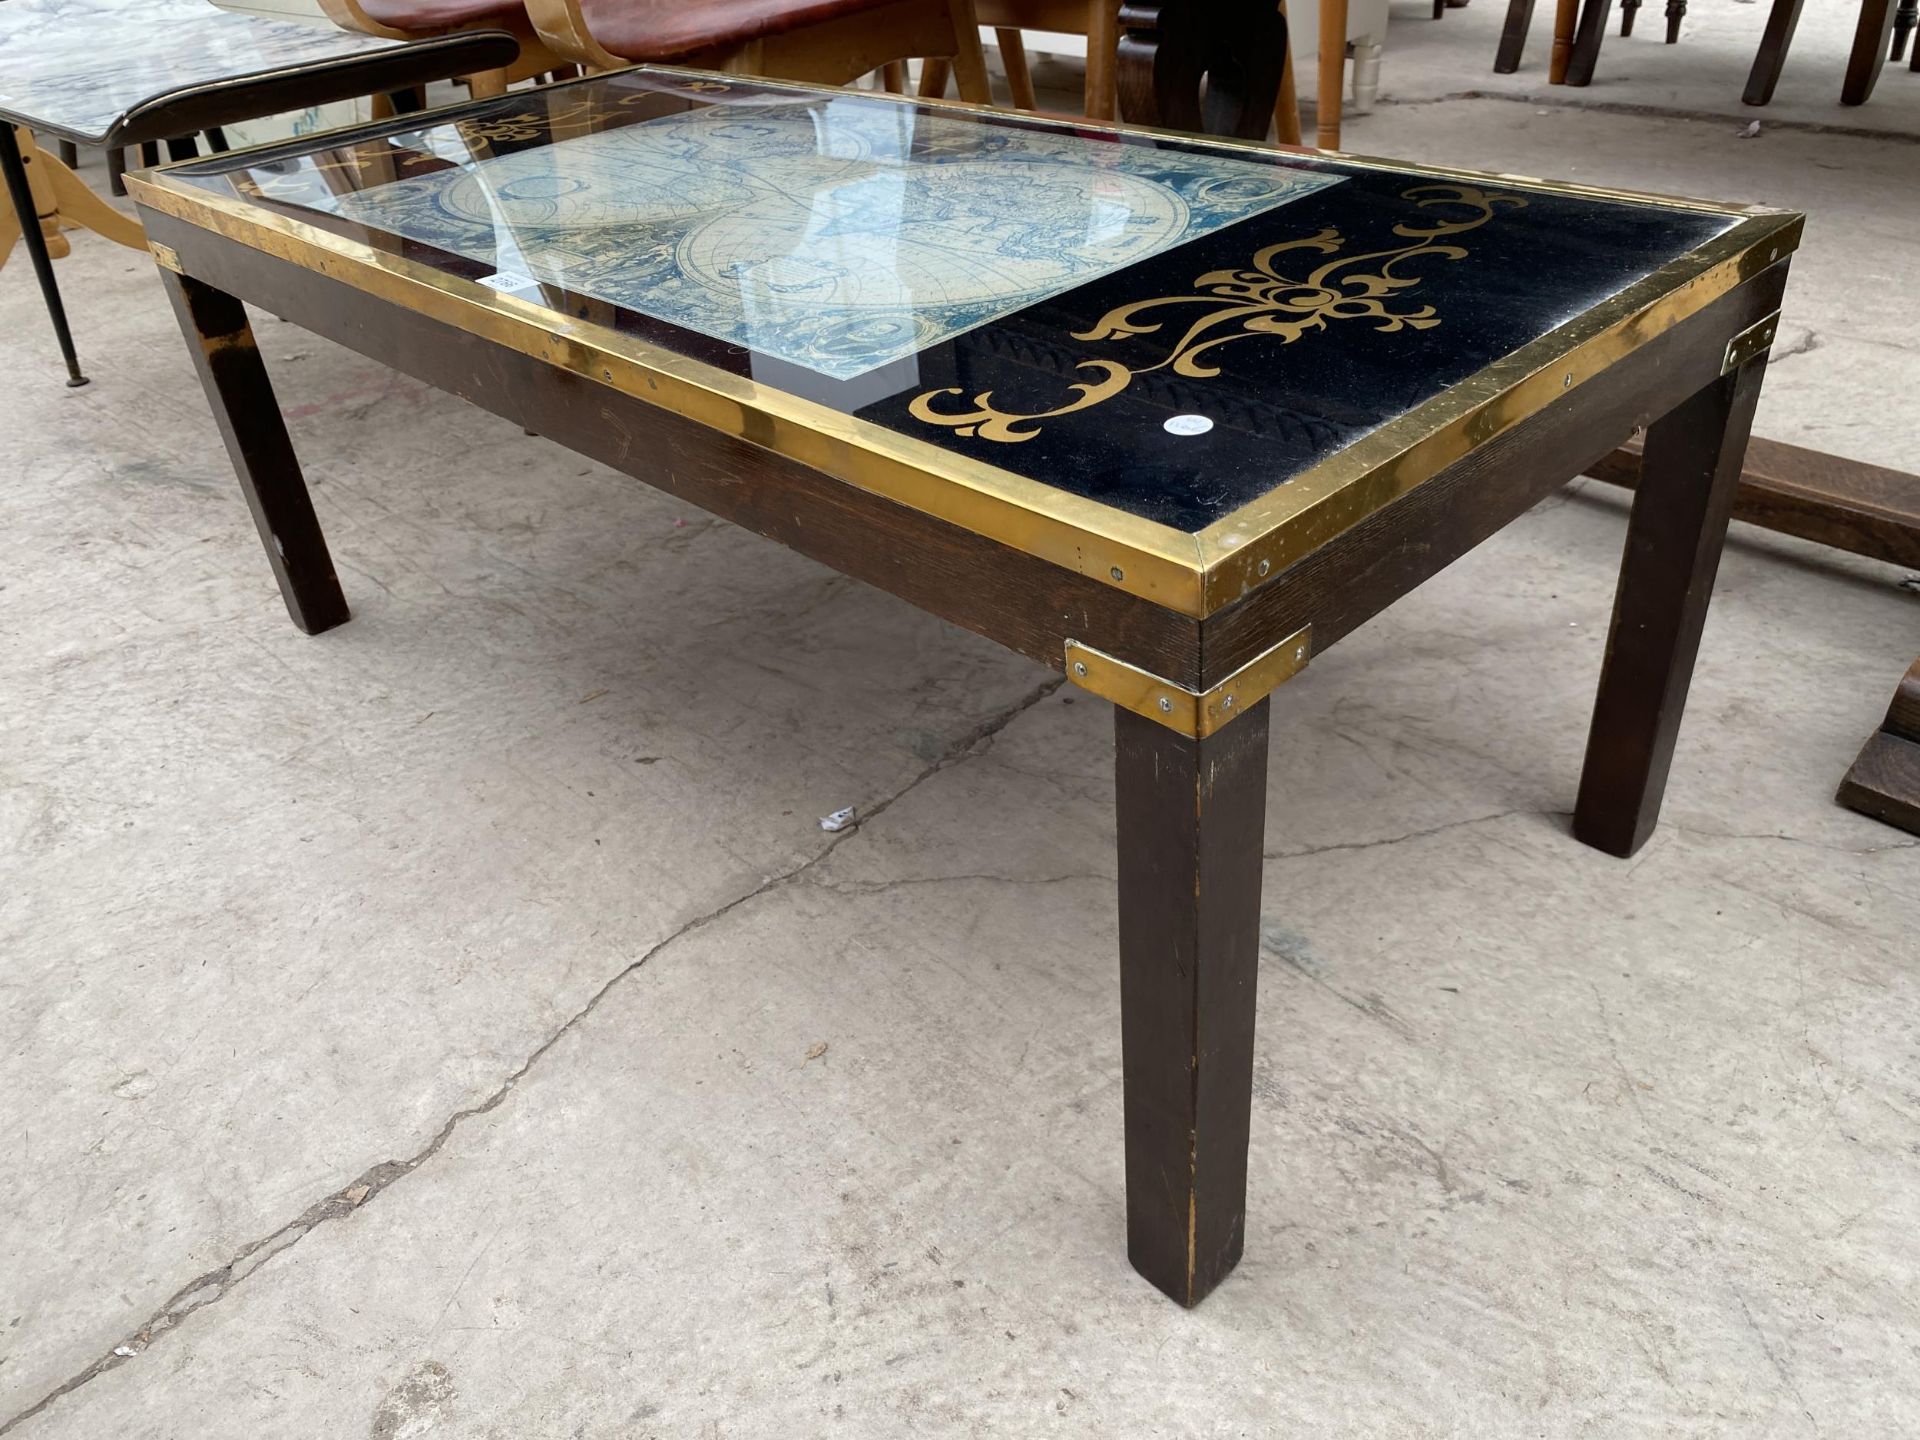 A COFFEE TABLE WITH BRASS TRIM ENCLOSING VINTAGE STYLE WORLD MAP 41" x 19" - Image 2 of 3